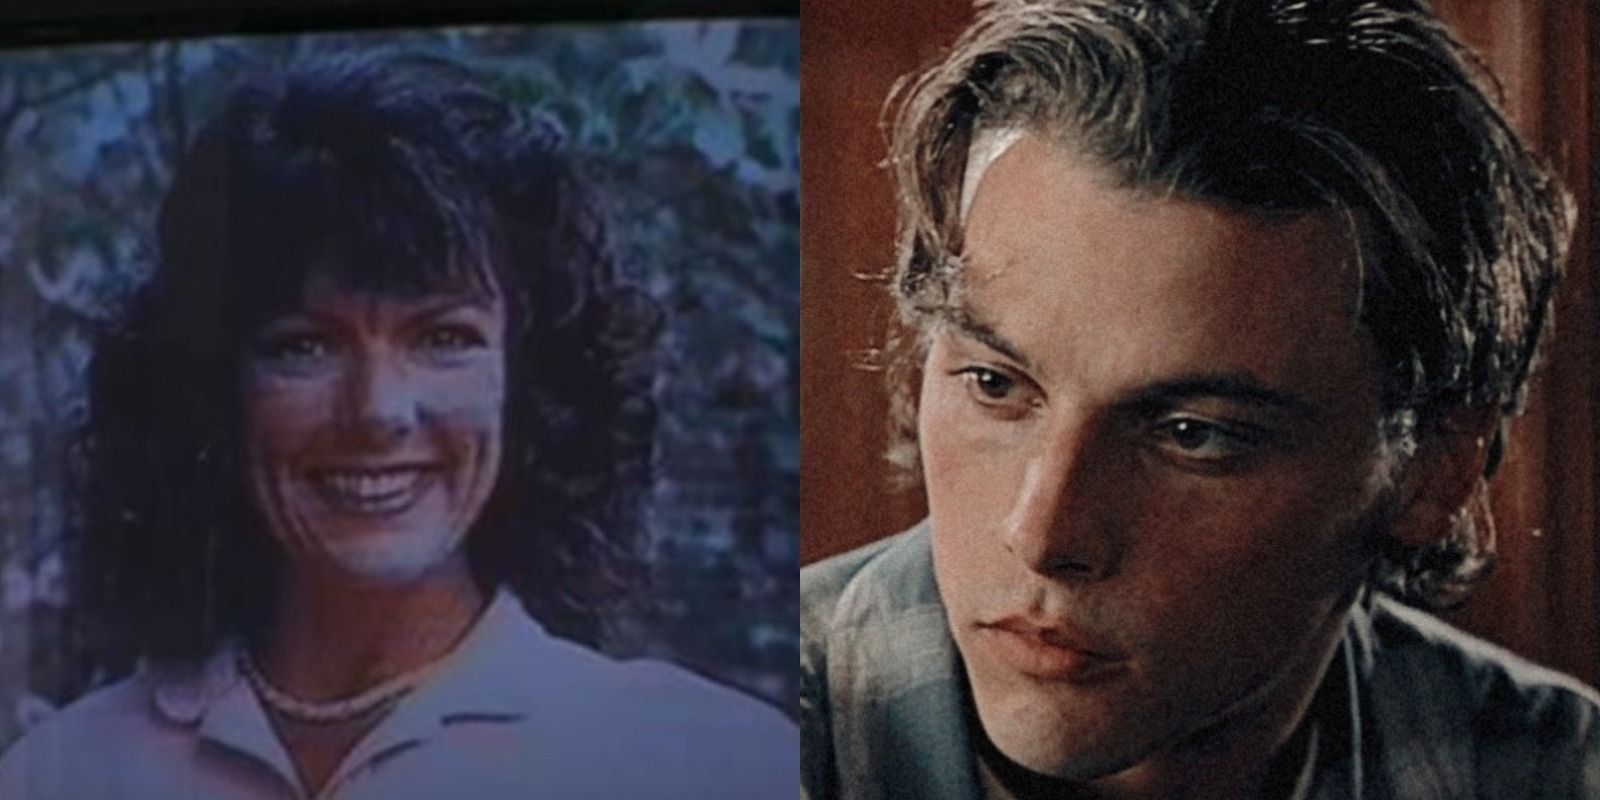 Split image featuring Maureen Prescott on the left and Billy Loomis on the right in the Scream franchise